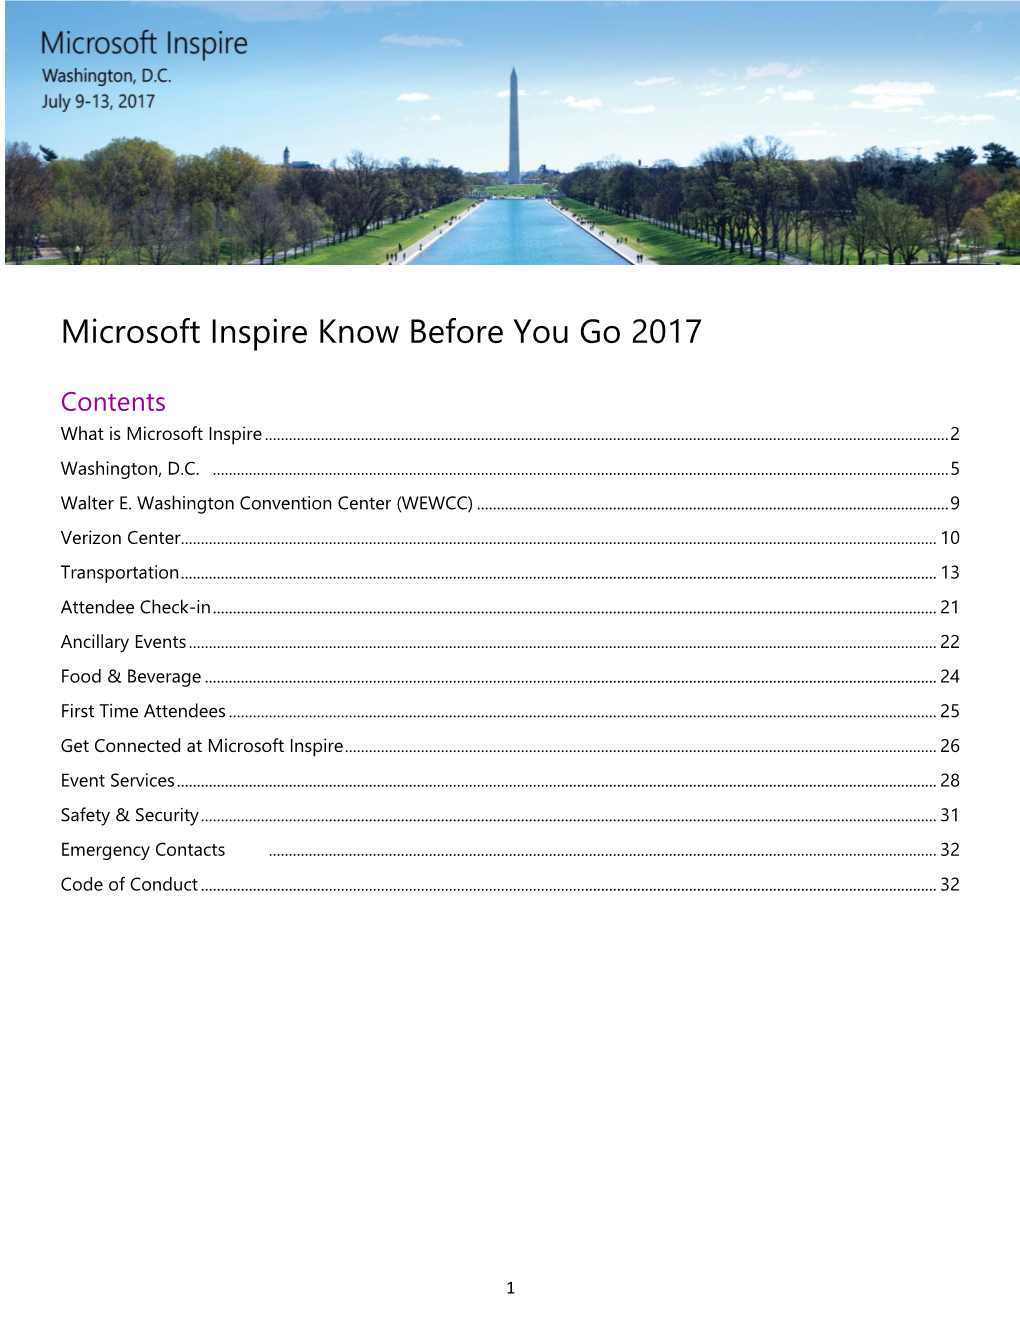 Microsoft Inspire Know Before You Go 2017